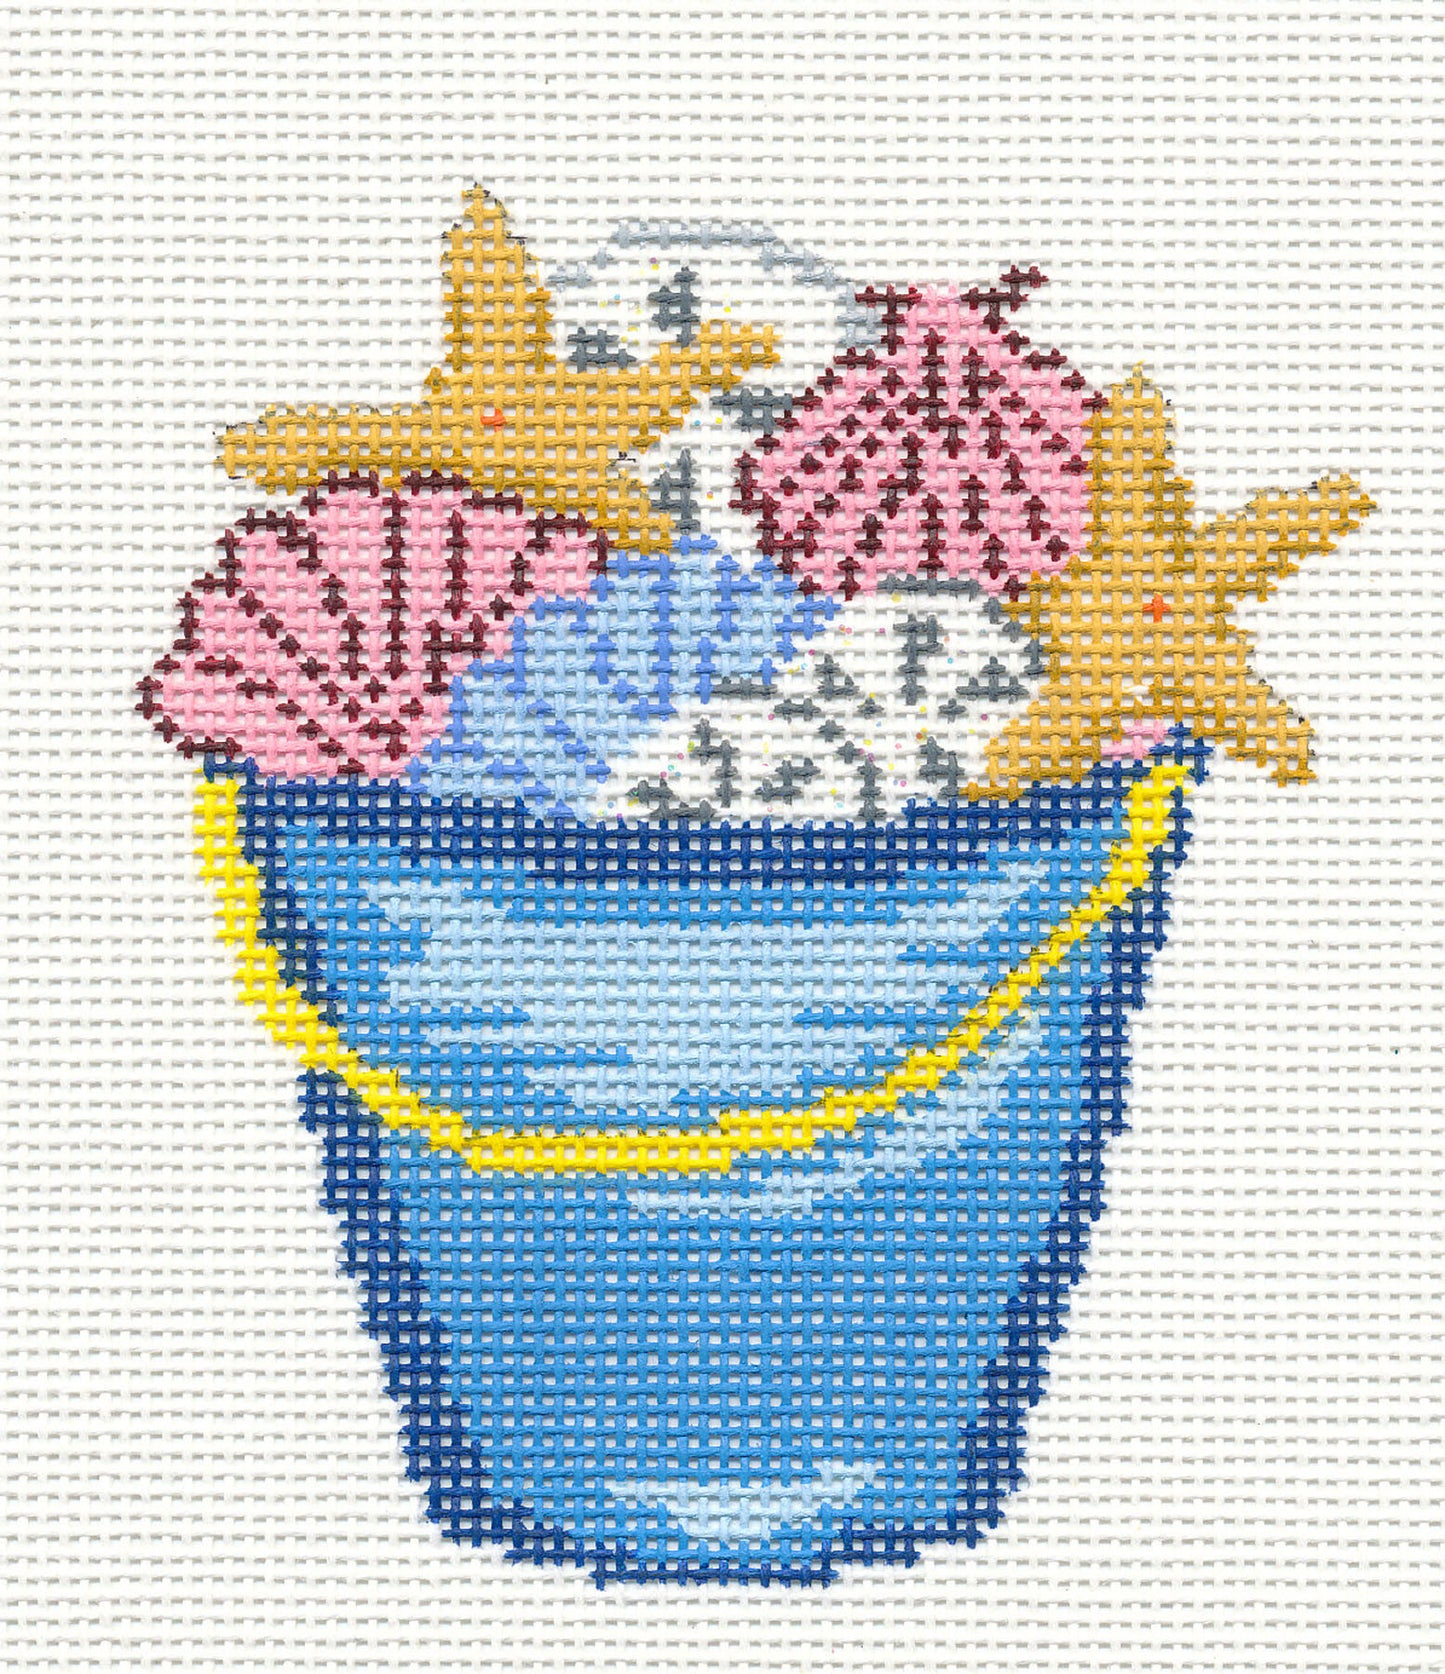 Summer Canvas ~ Summer Blue Beach Bucket filled with Shells handpainted Needlepoint Canvas by Needle Crossings